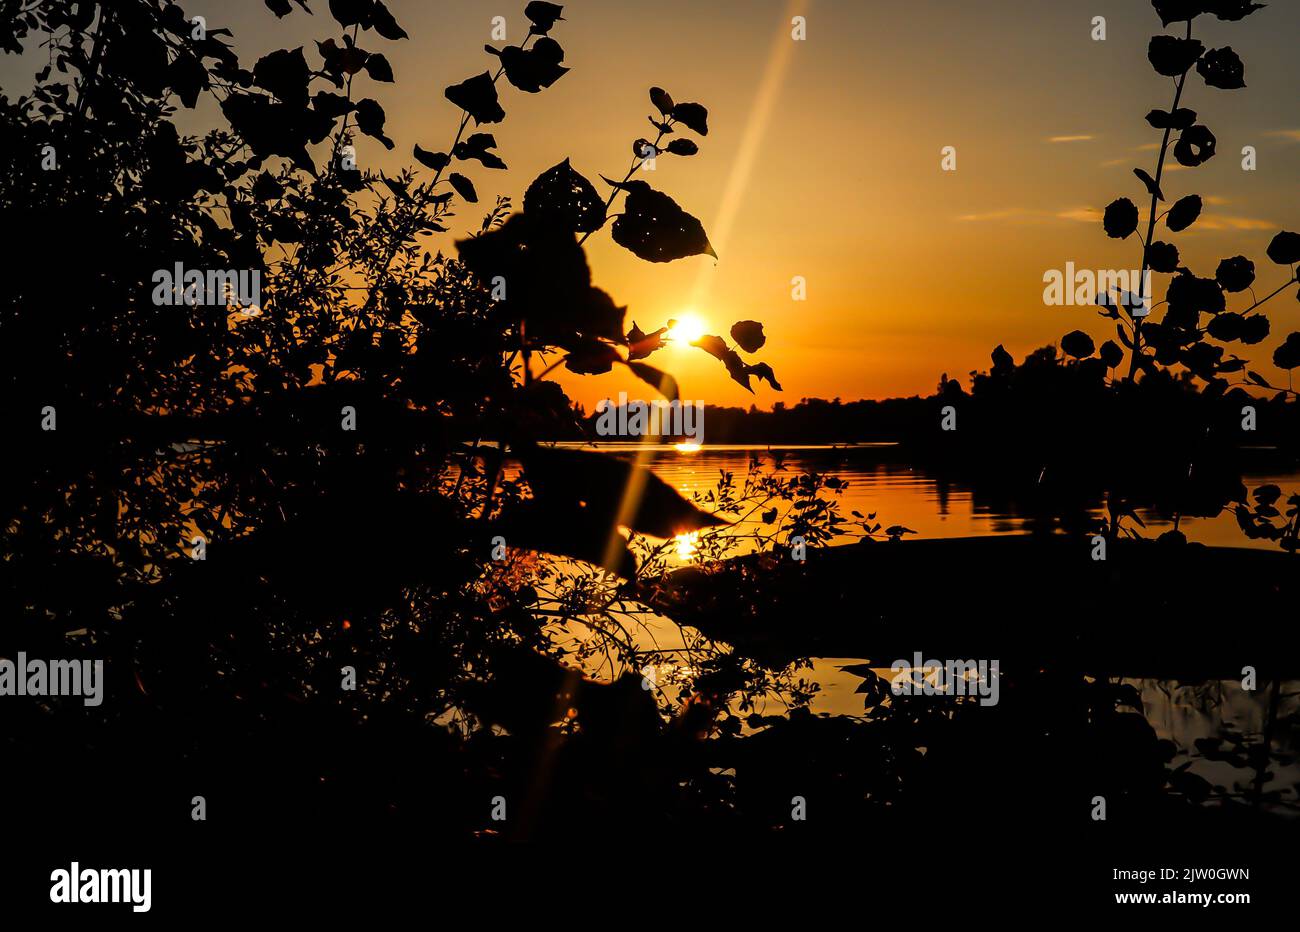 Beautiful sunset view by the lake in Eskilstuna, Sweden. Stock Photo